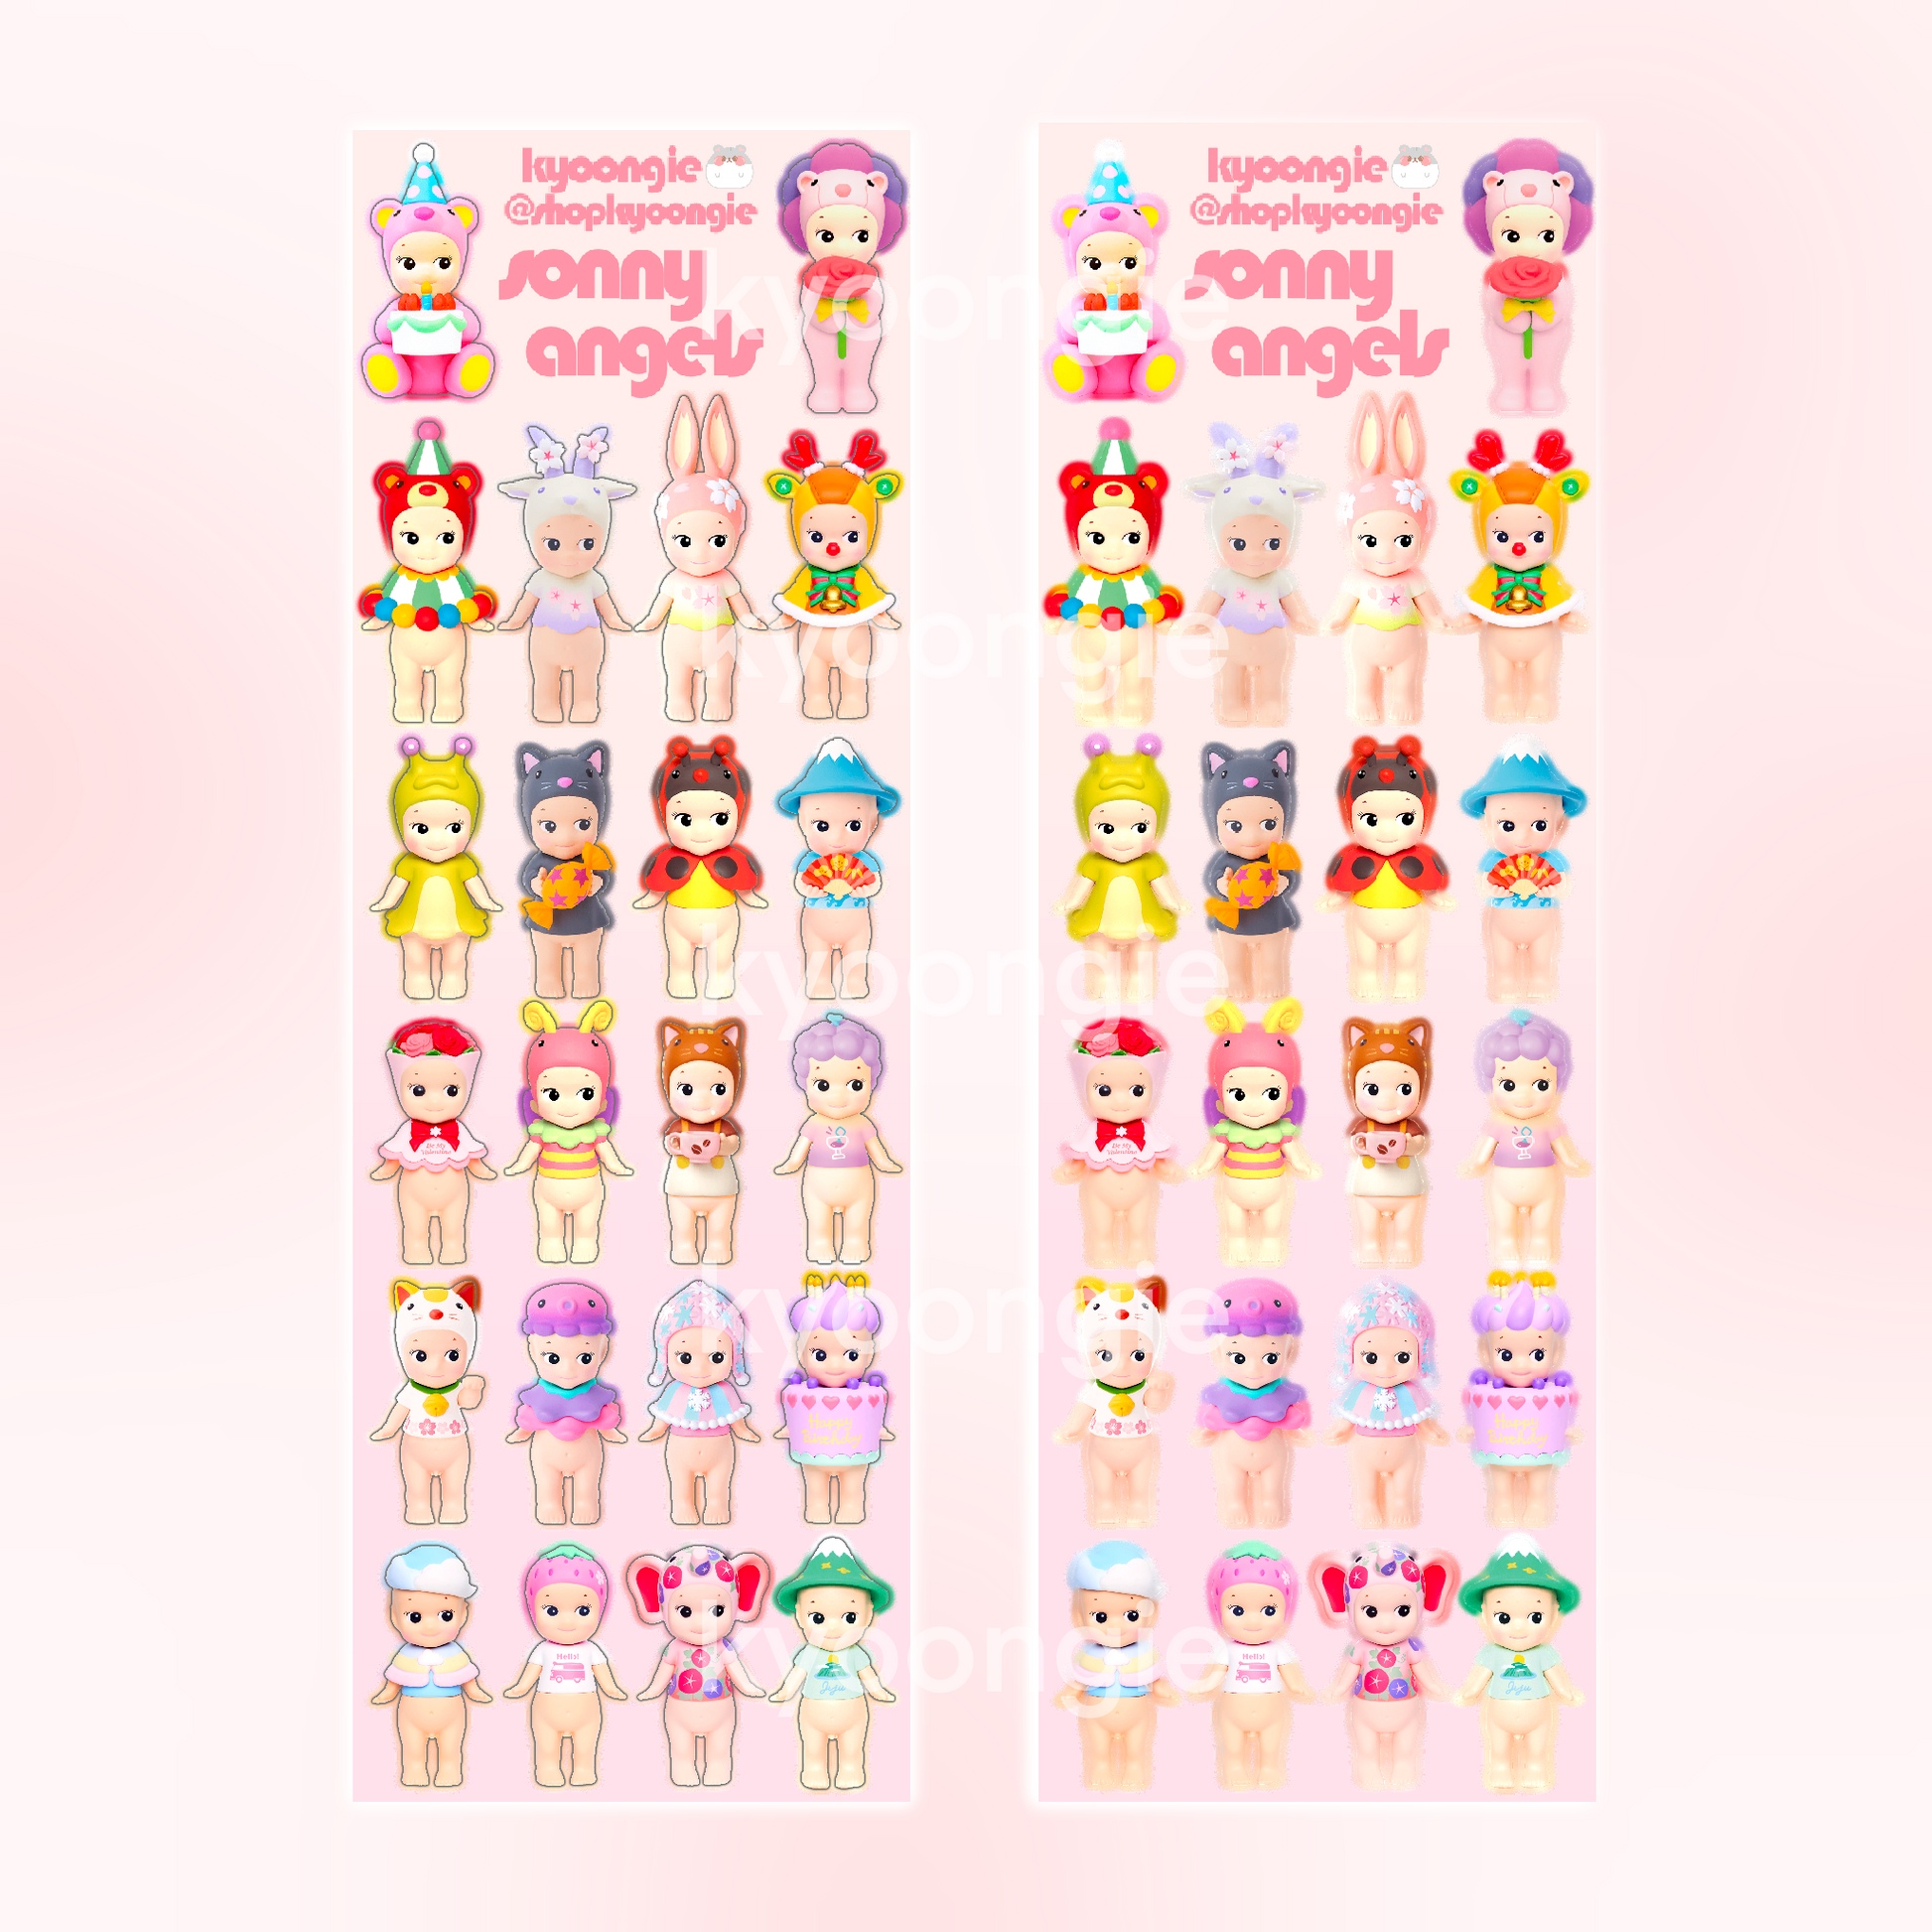 Sonny Angel Stickers (Ver. 2 - Costumes) – kyoongie